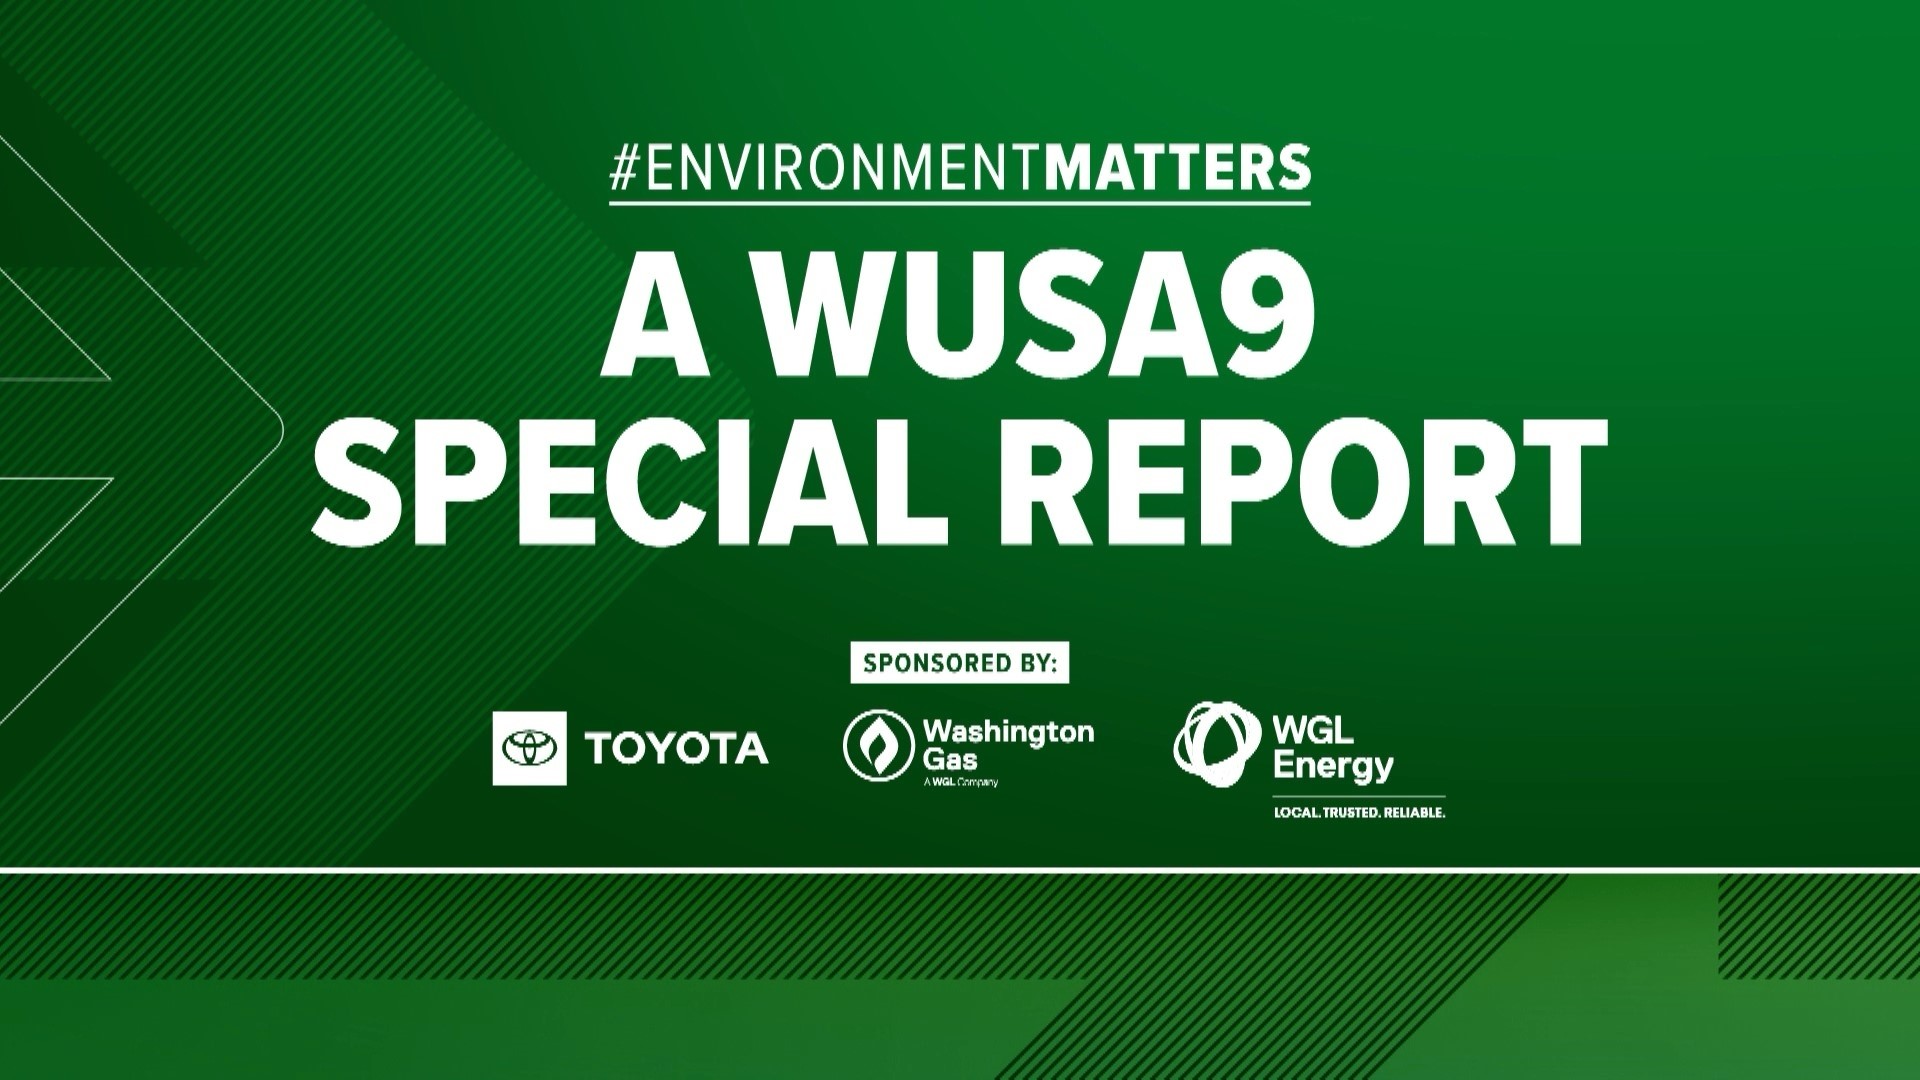 WUSA9 takes a deep dive into the environmental challenges our region faces, and ways our neighbors are working to make positive change.